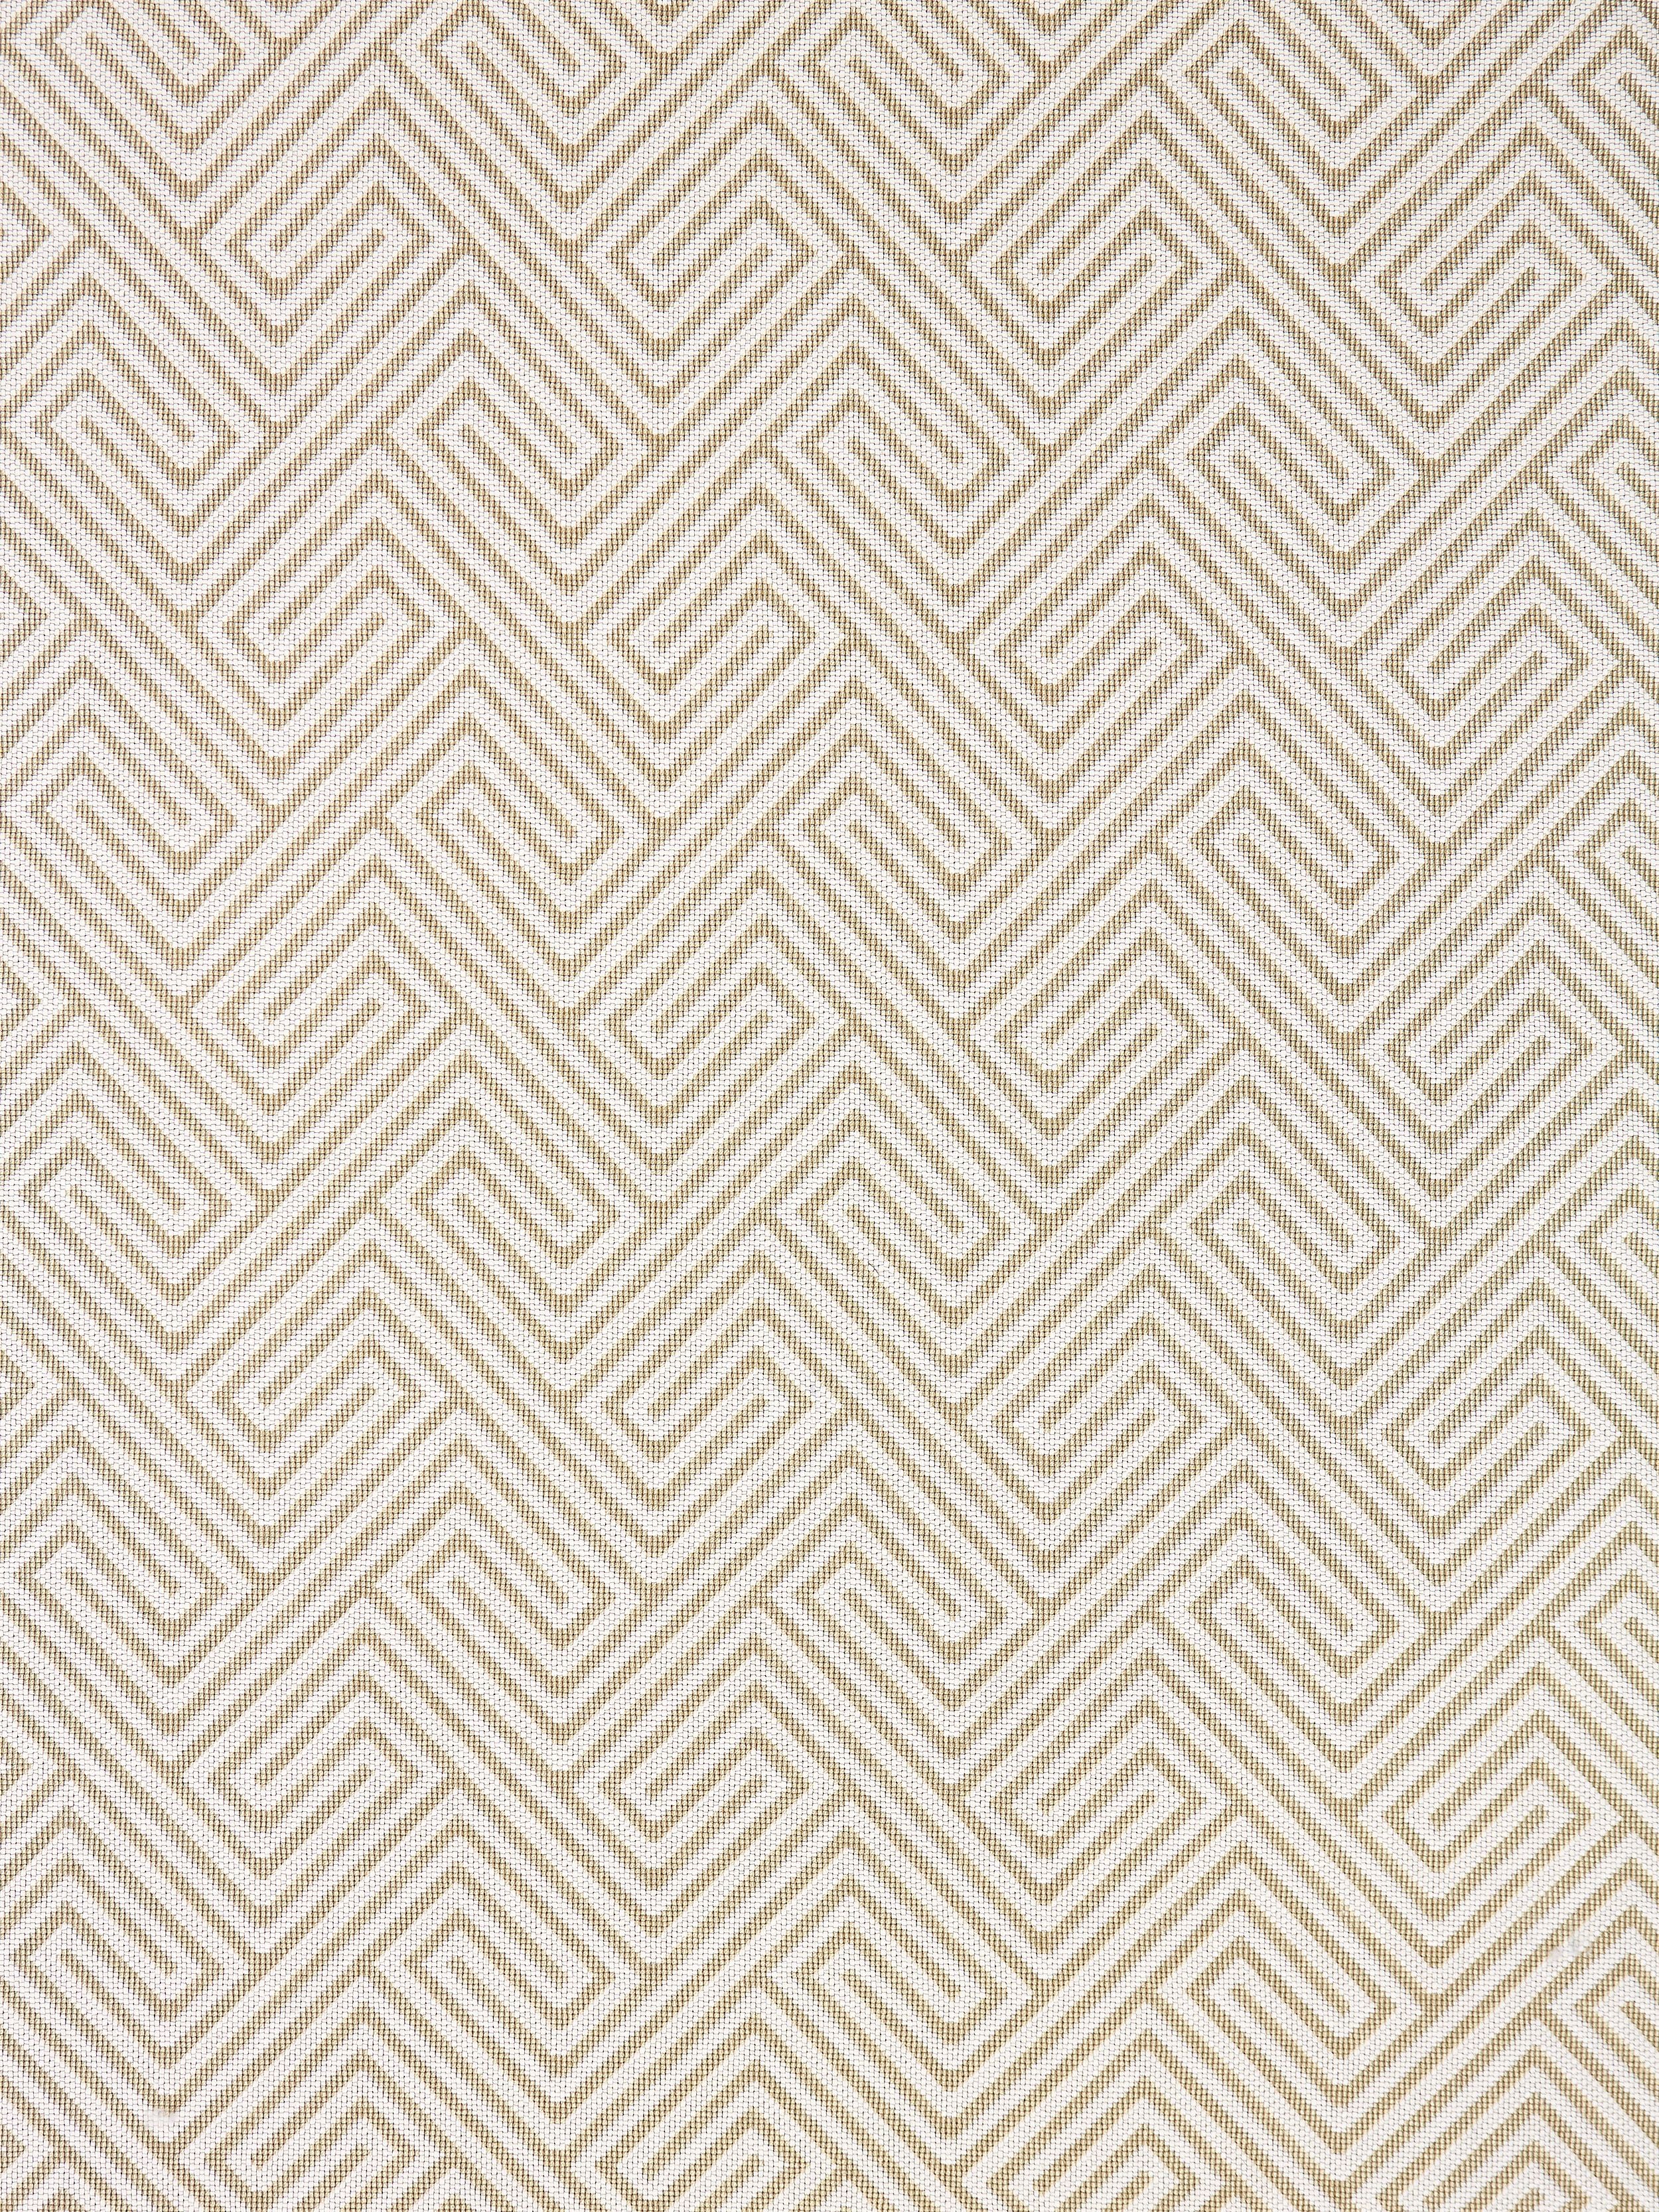 Labyrinth Weave fabric in sand color - pattern number SC 000127030 - by Scalamandre in the Scalamandre Fabrics Book 1 collection